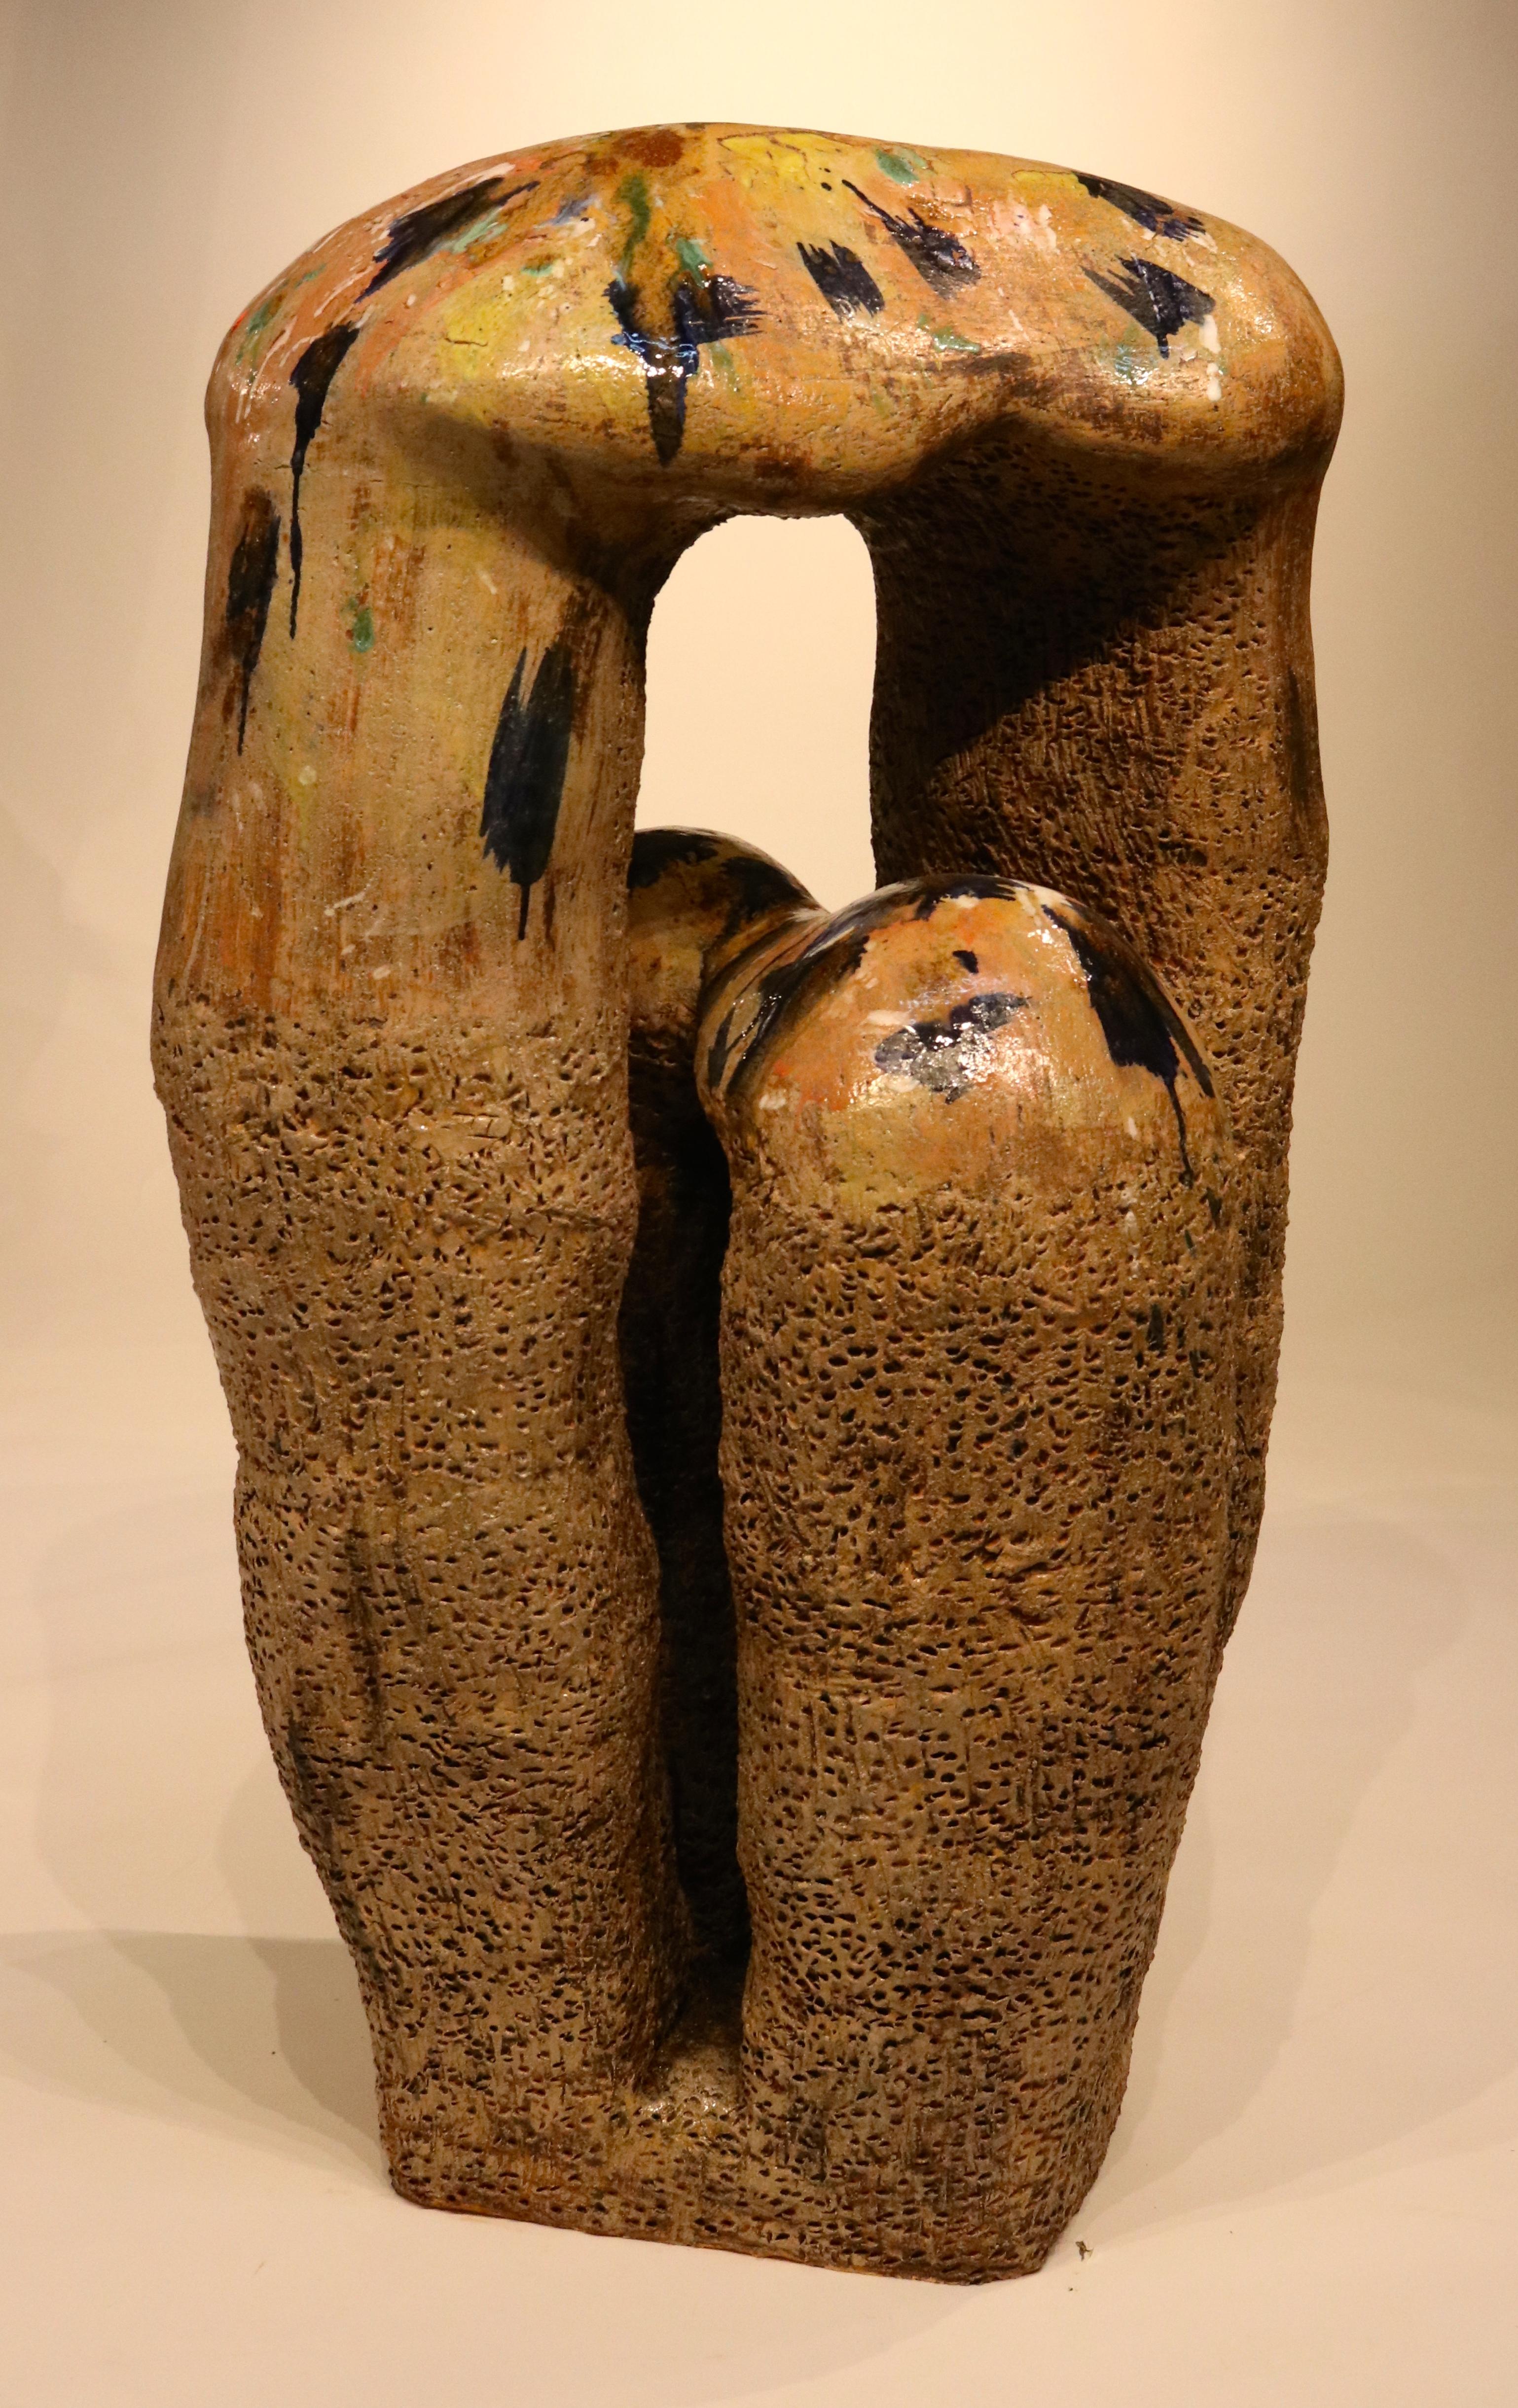 Ash Glazed Abstract Primitive Sculpture Art  - Large Ceramic Pottery 250 lbs. - Beige Abstract Sculpture by Mark Wade